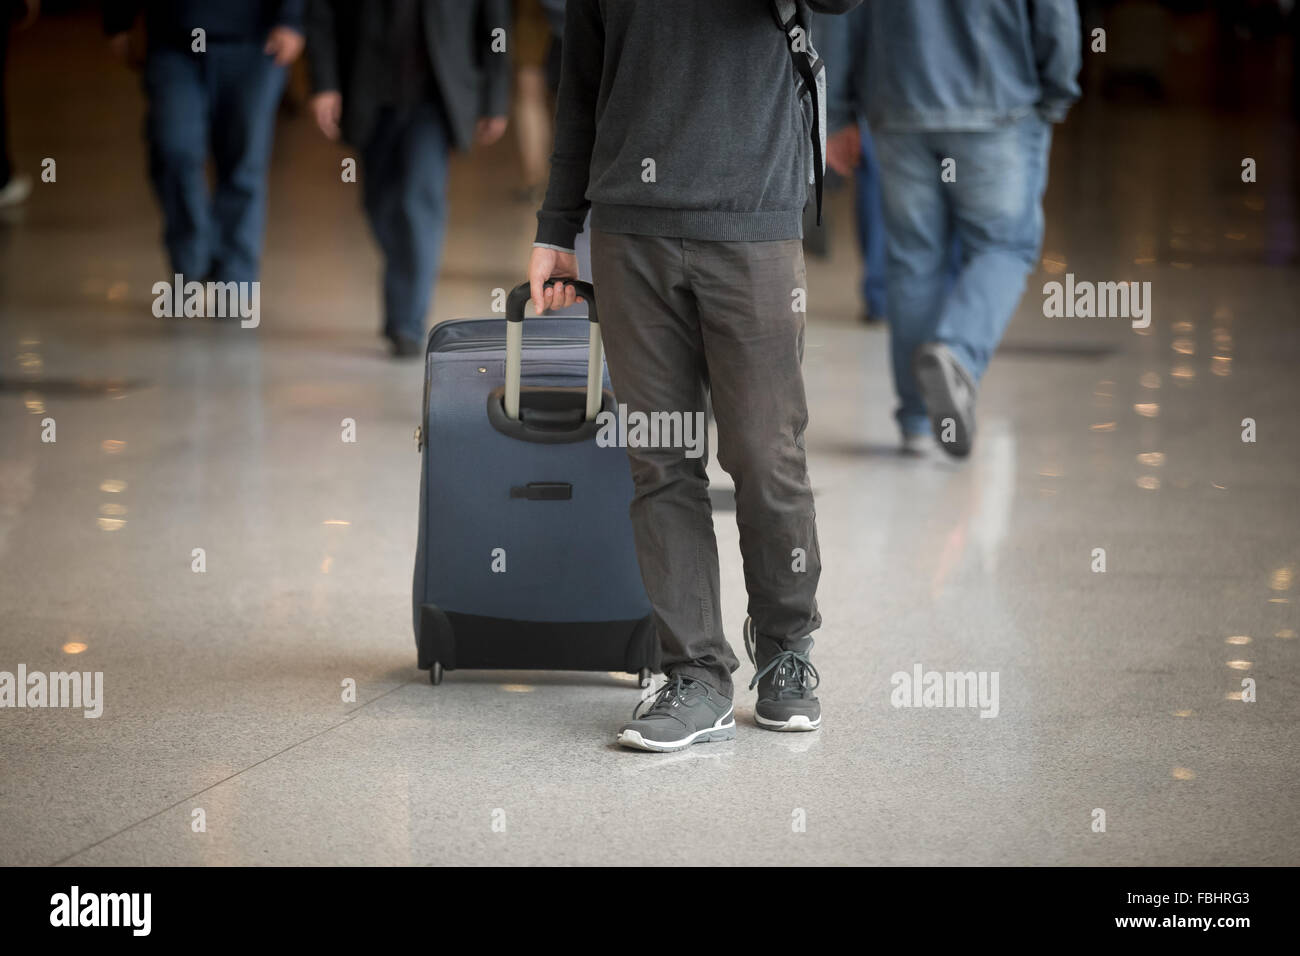 Young man with suitcase walking in modern airport terminal with crowd on background, wearing casual style clothes, close up Stock Photo